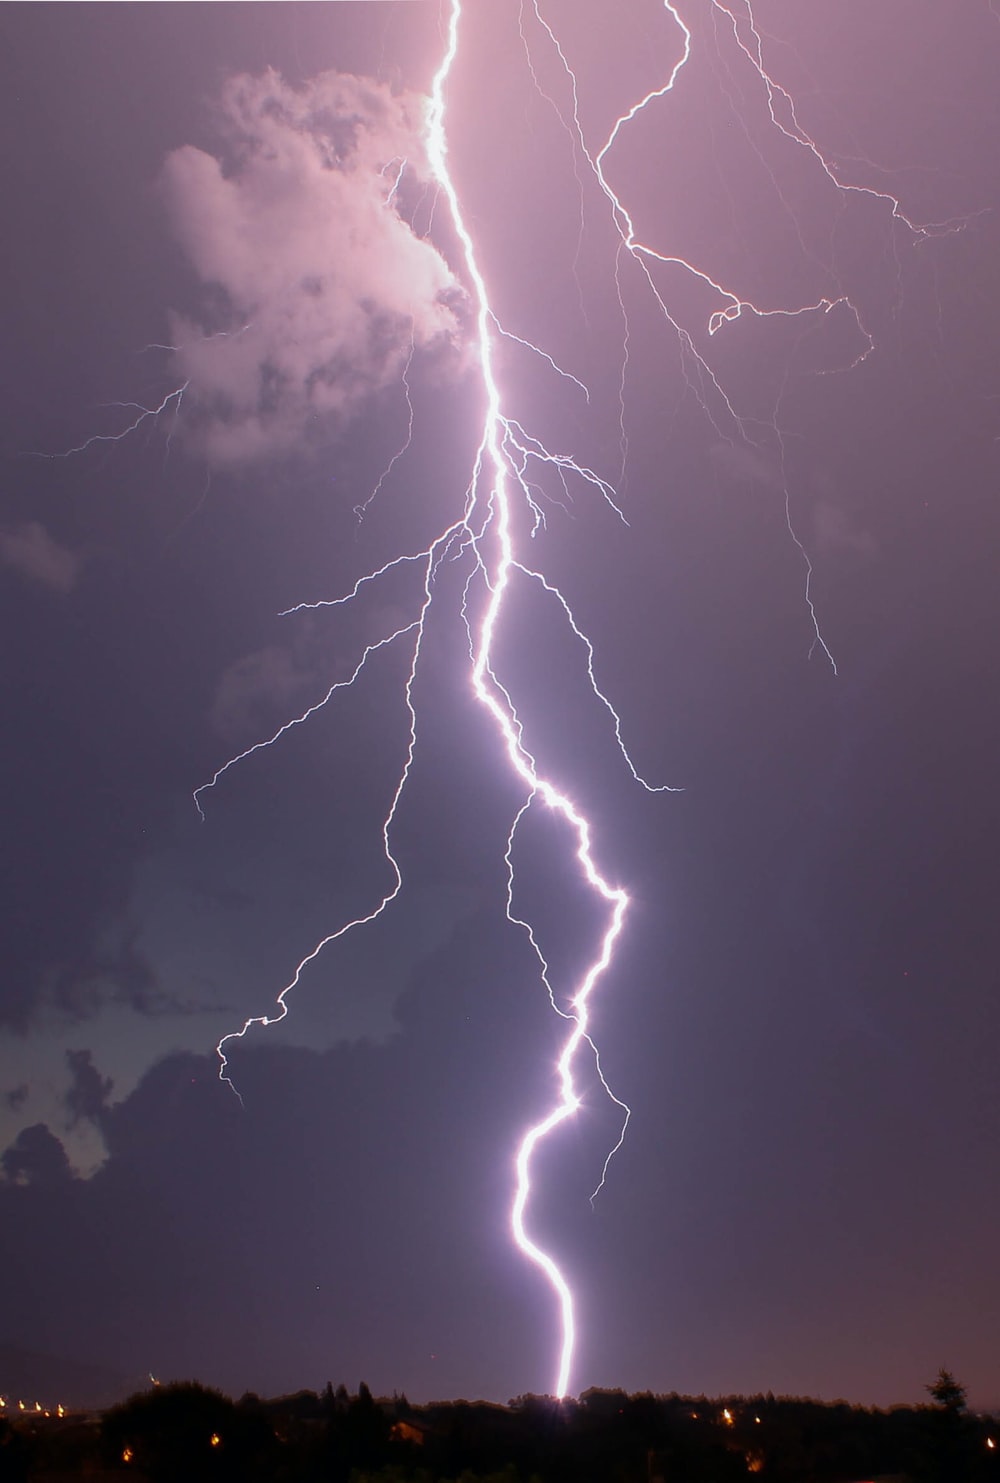 1K+ Thunder And Lightning Picture. Download Free Image